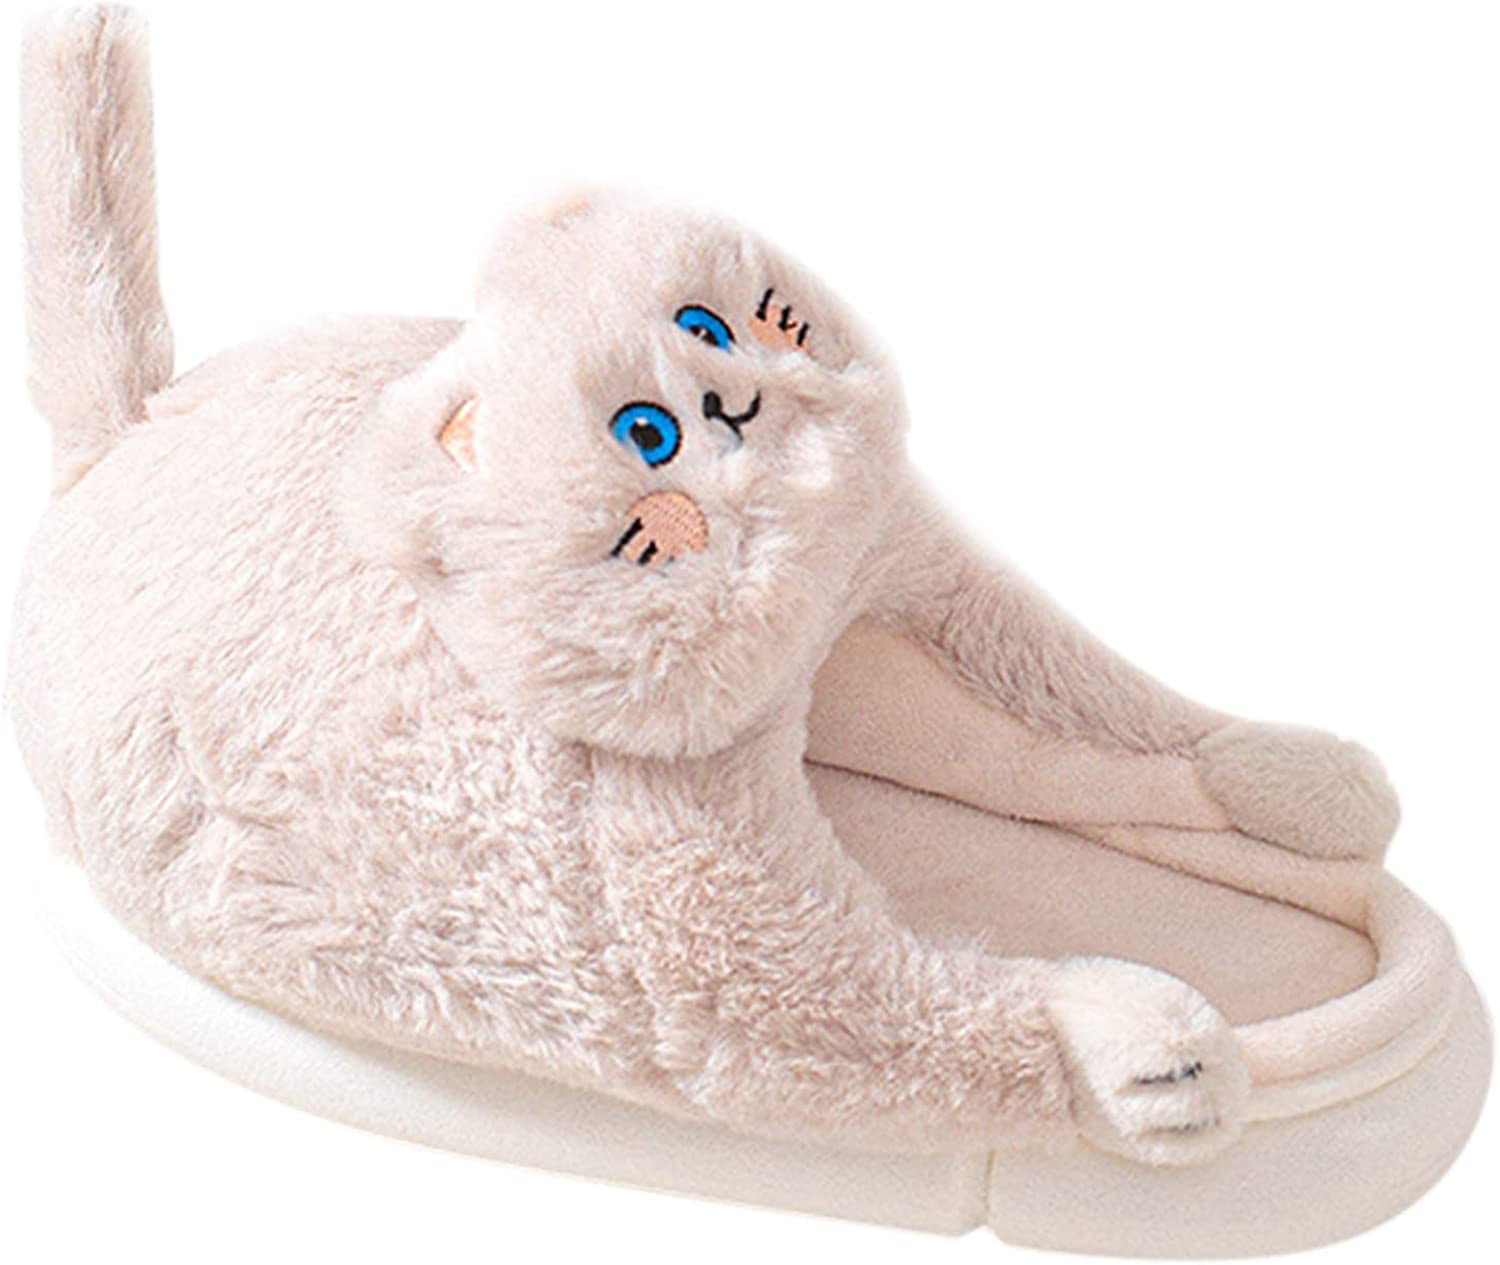 Funny Cat Fuzzy Slippers For Women Bedroom Fluffy Slippers House Shoes Cute Animal Indoor And Outdoor Slippers Women S Slippers 242281d3 1fca 4a63 8a89 10781d7eb585.dde70ffabfcb84f2dd2151bf7f7e1c90